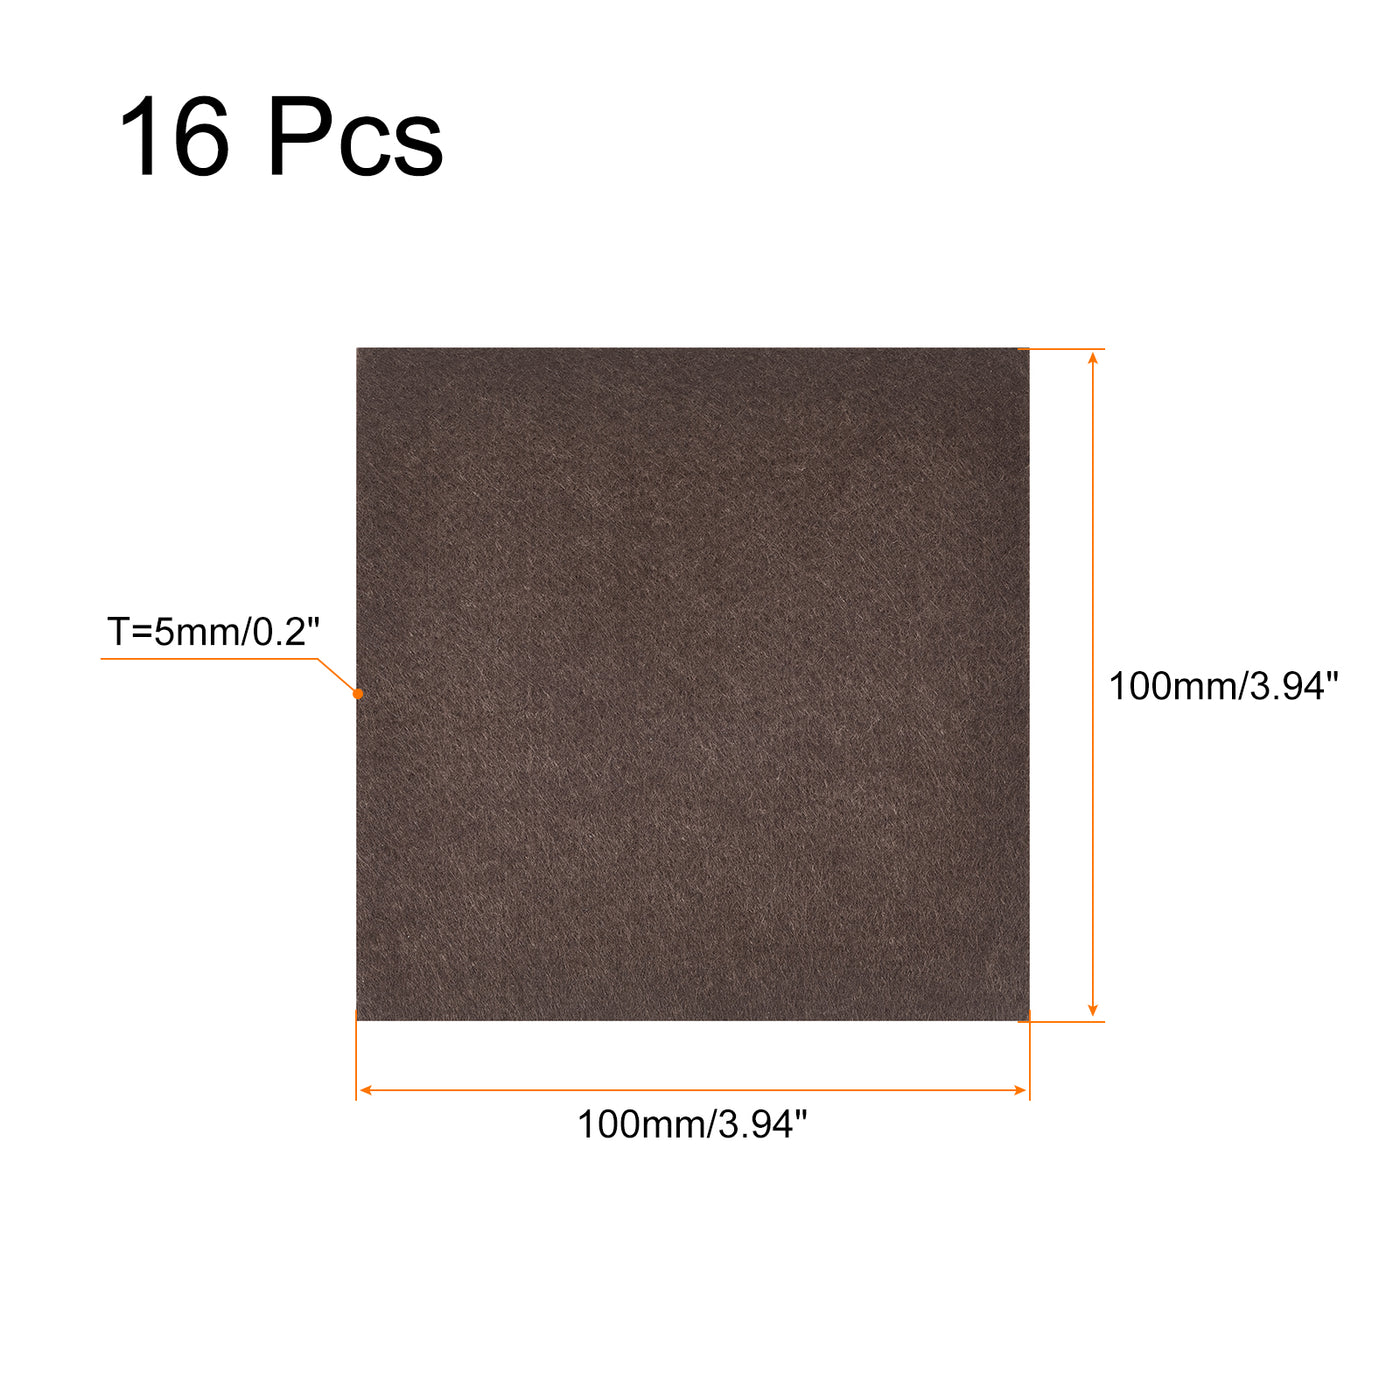 uxcell Uxcell Felt Furniture Pads, 100mm x 100mm Self Adhesive Square Floor Protectors for Furniture Legs Hardwood Floor, Brown 16Pcs